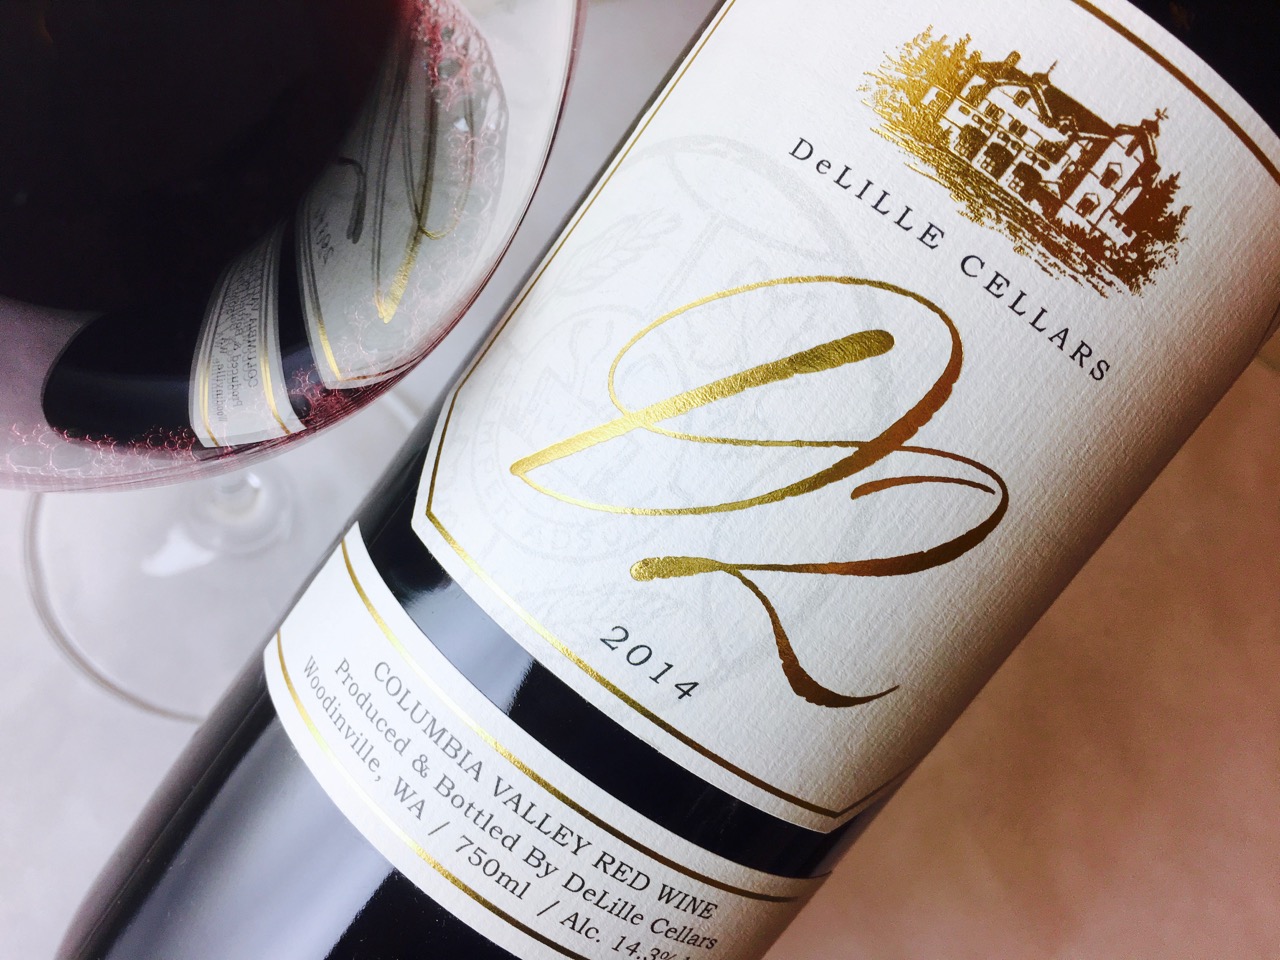 2014 DeLille Cellars Red Blend D2 Columbia Valley